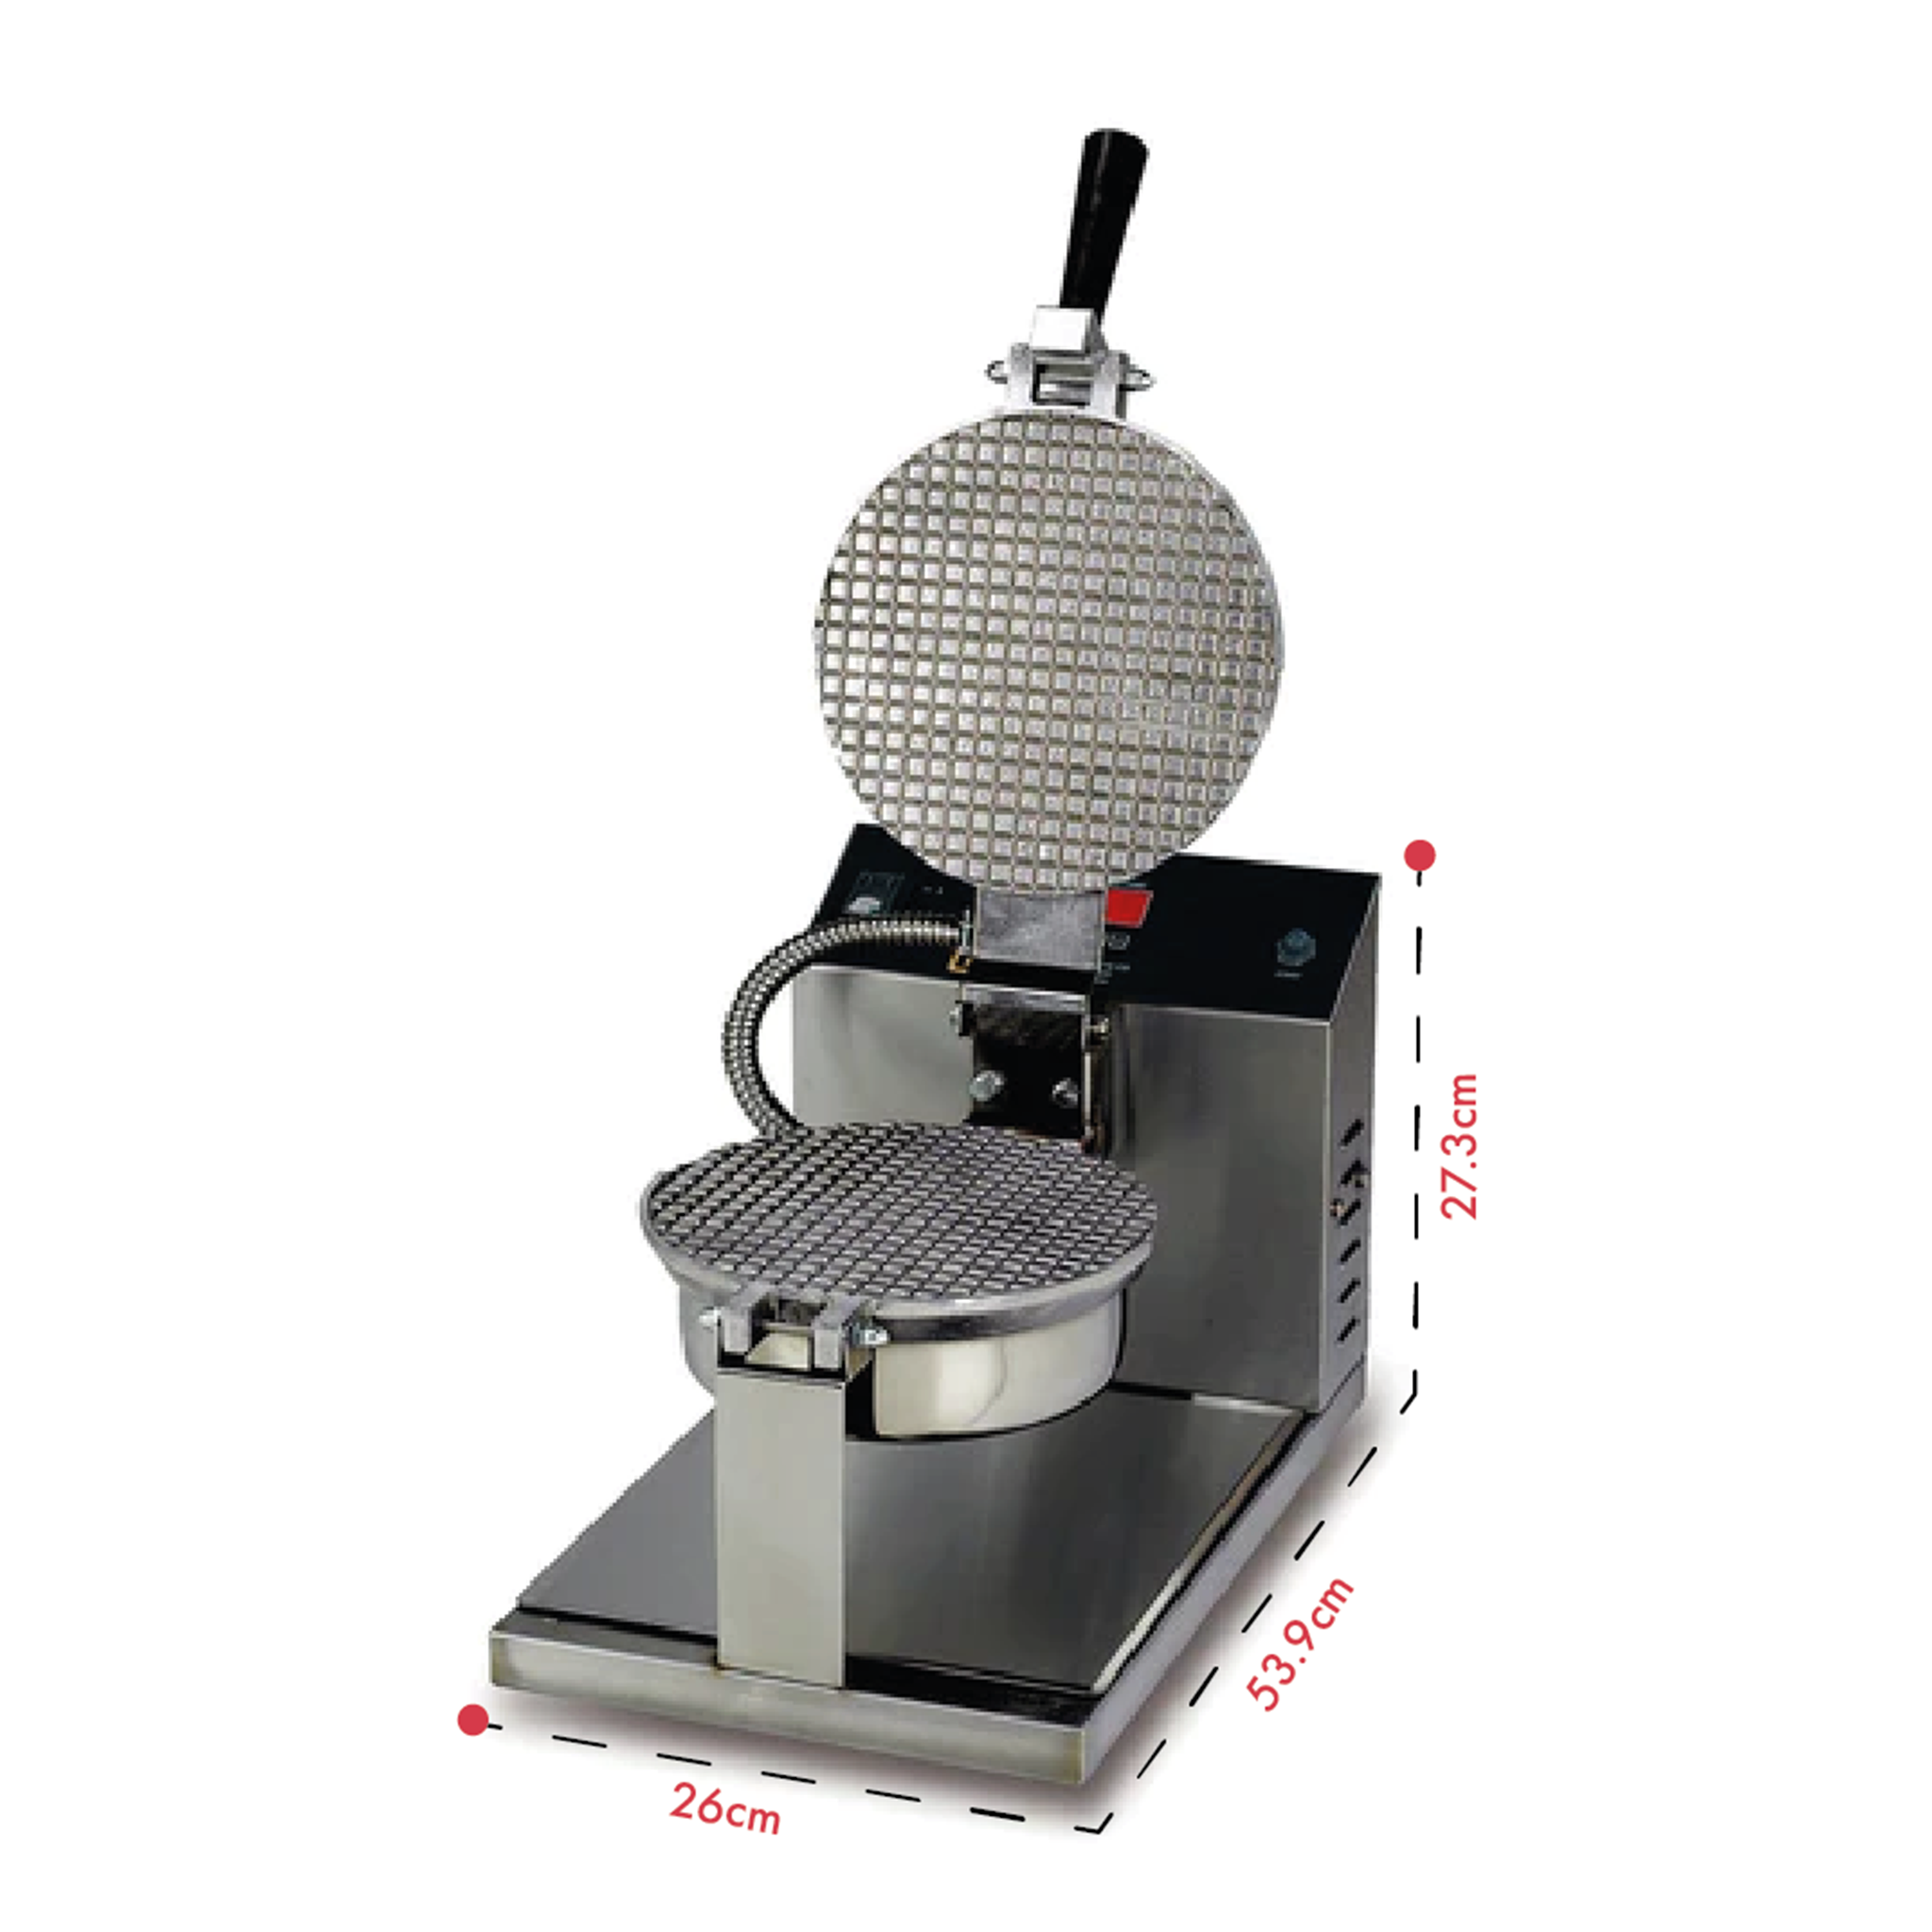 Giant Waffle Cone Maker